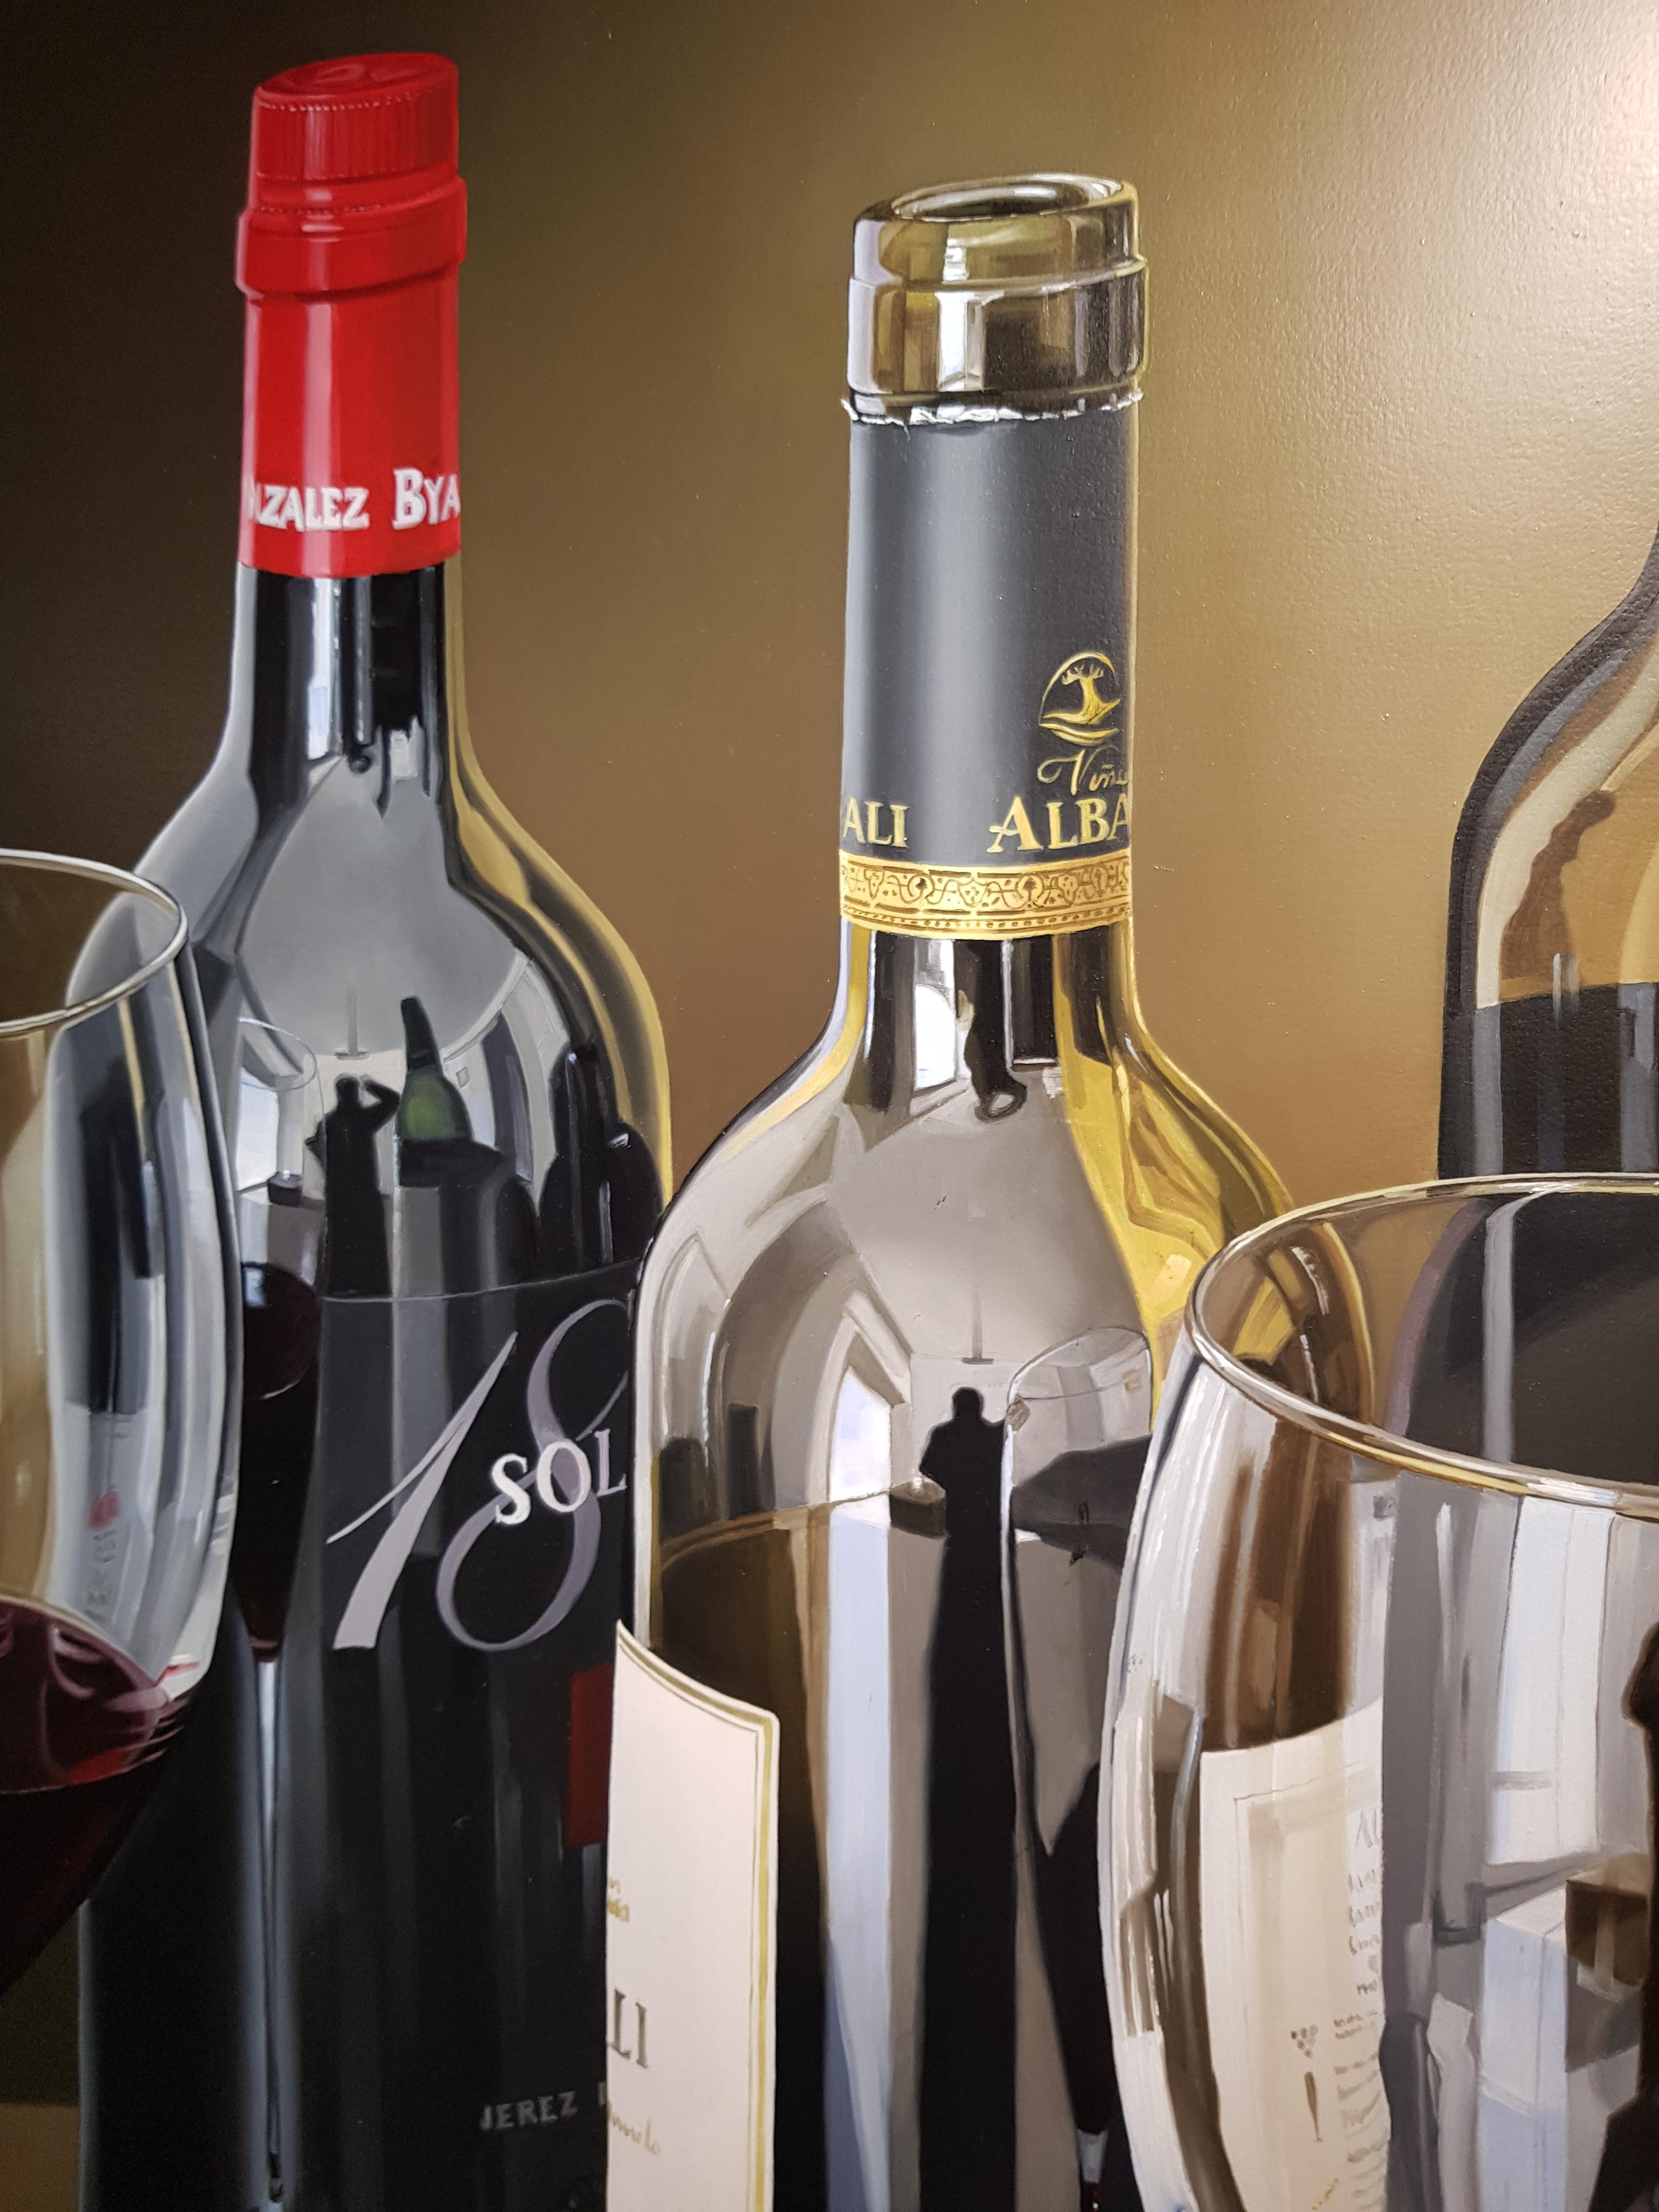  'Wine Reflections' by Miguel Angel Nunez is a Contemporary Photorealist Painting. Miguel A. Nuñez, was born in Maldondo the Republic of Uruguay in 1966. From early childhood Nuñez was fascinated by drawing, which he practised meticulously. 

Such